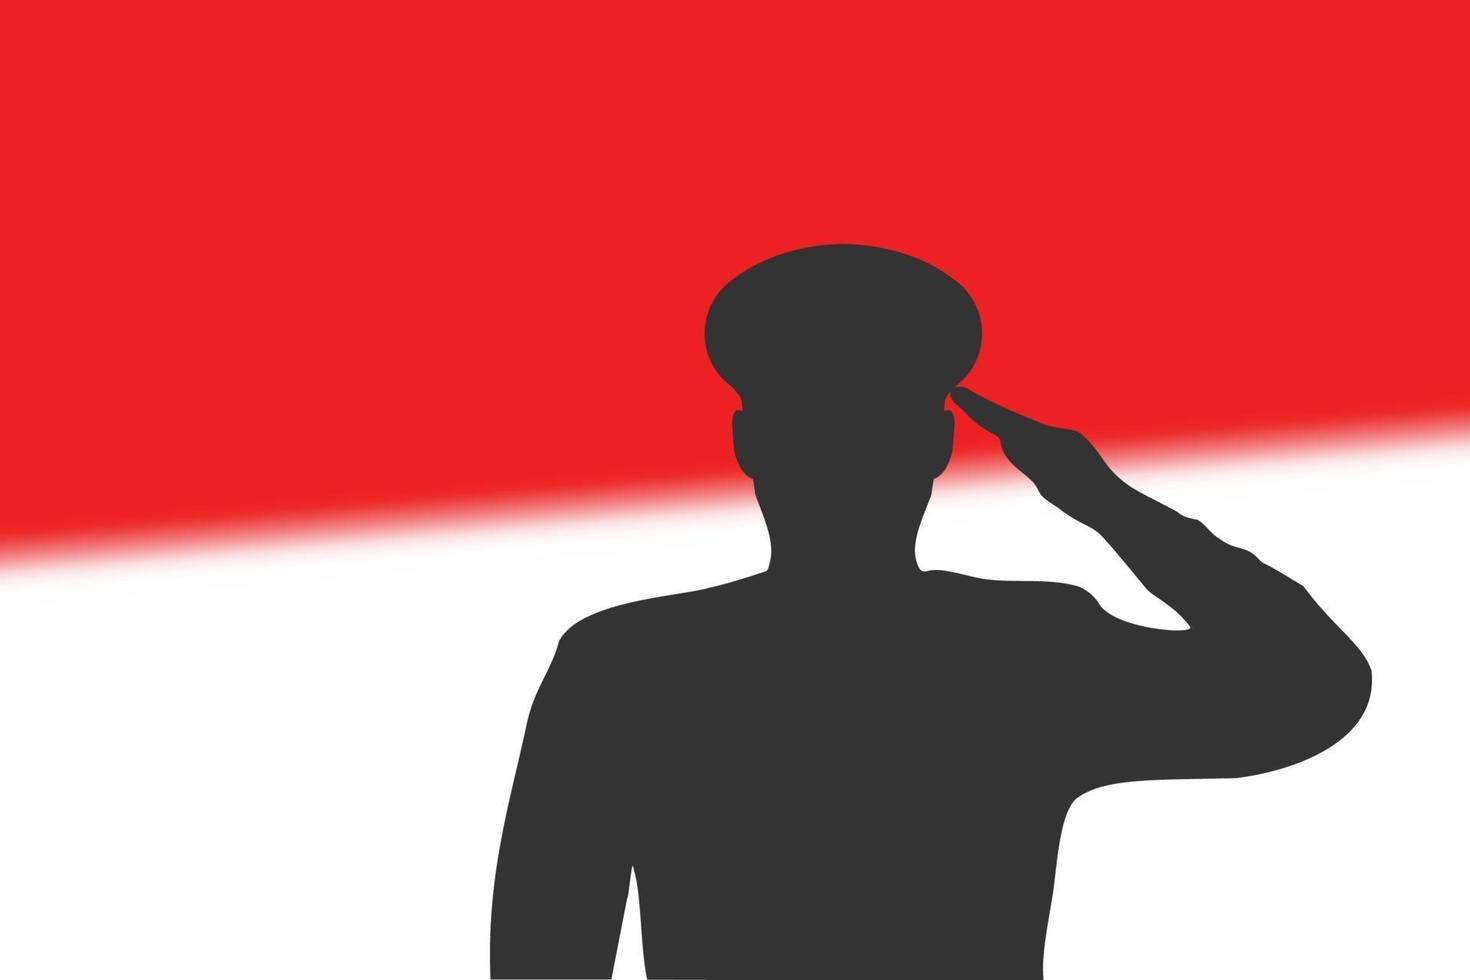 Solder silhouette on blur background with Indonesia flag. vector